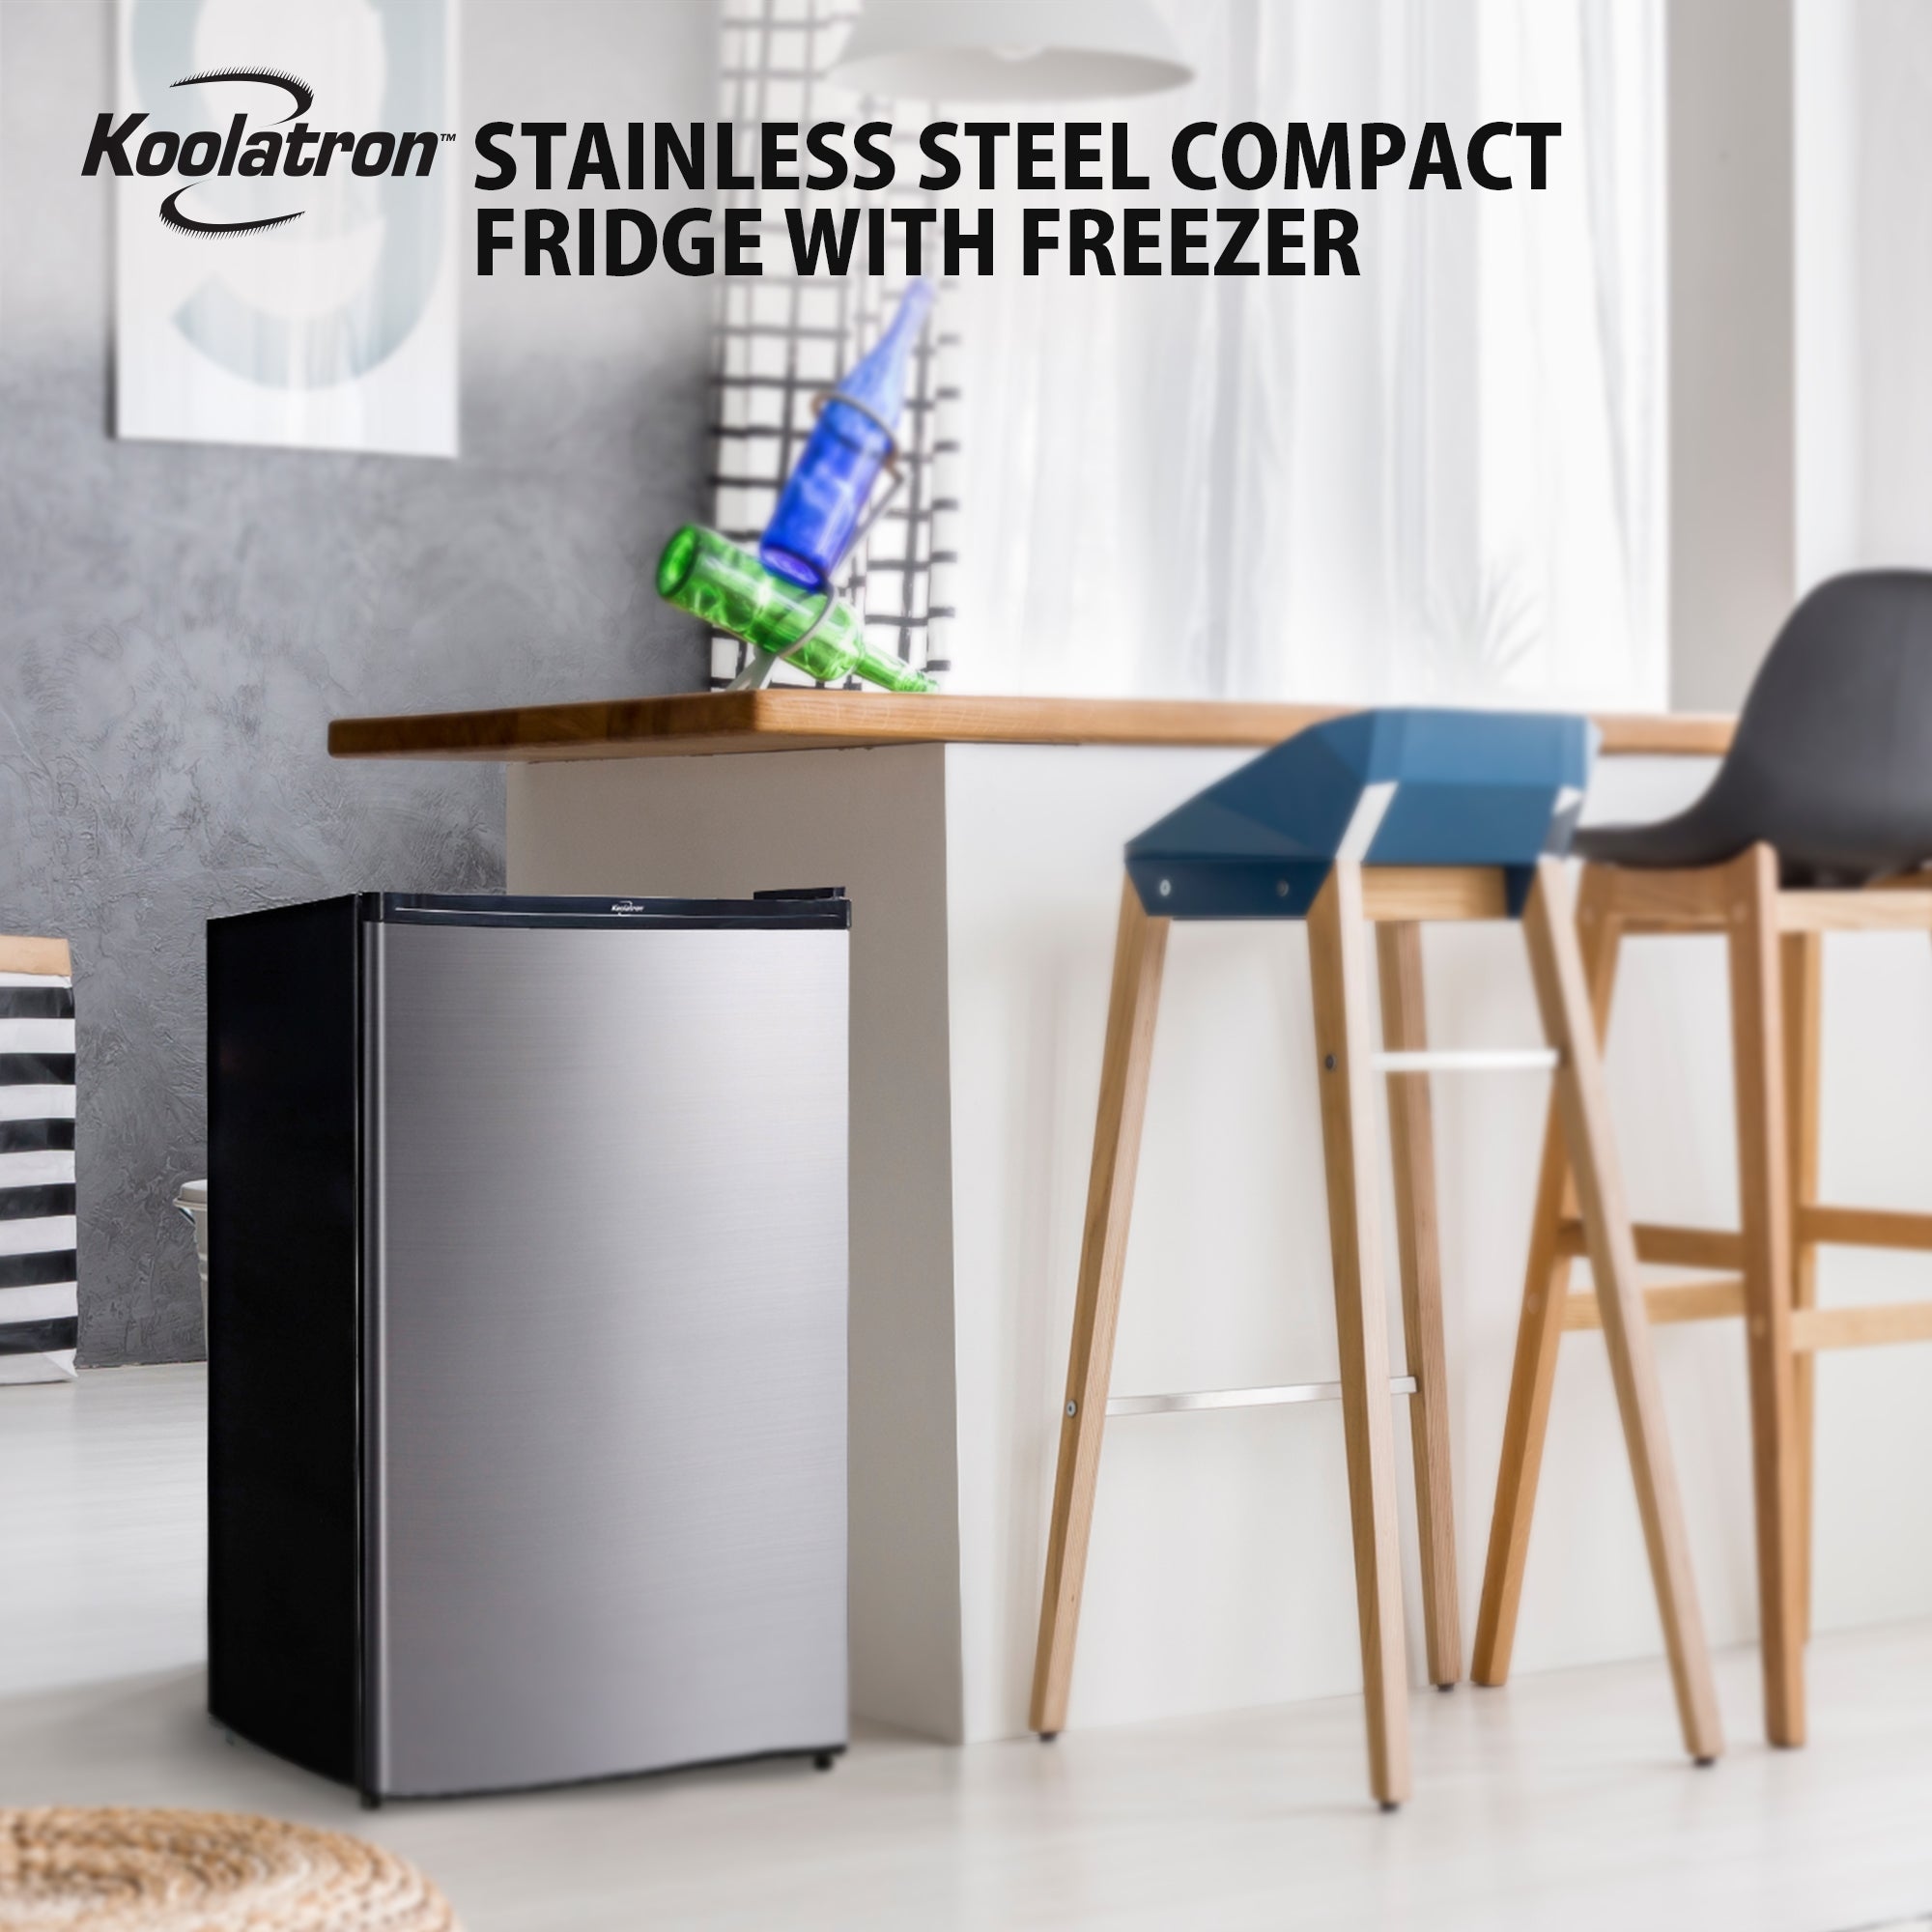 Lifestyle image of black and stainless steel compact fridge with freezer beside a white breakfast bar with wooden countertop and two wood and plastic bar stools. Text above reads "Koolatron stainless steel compact fridge with freezer"